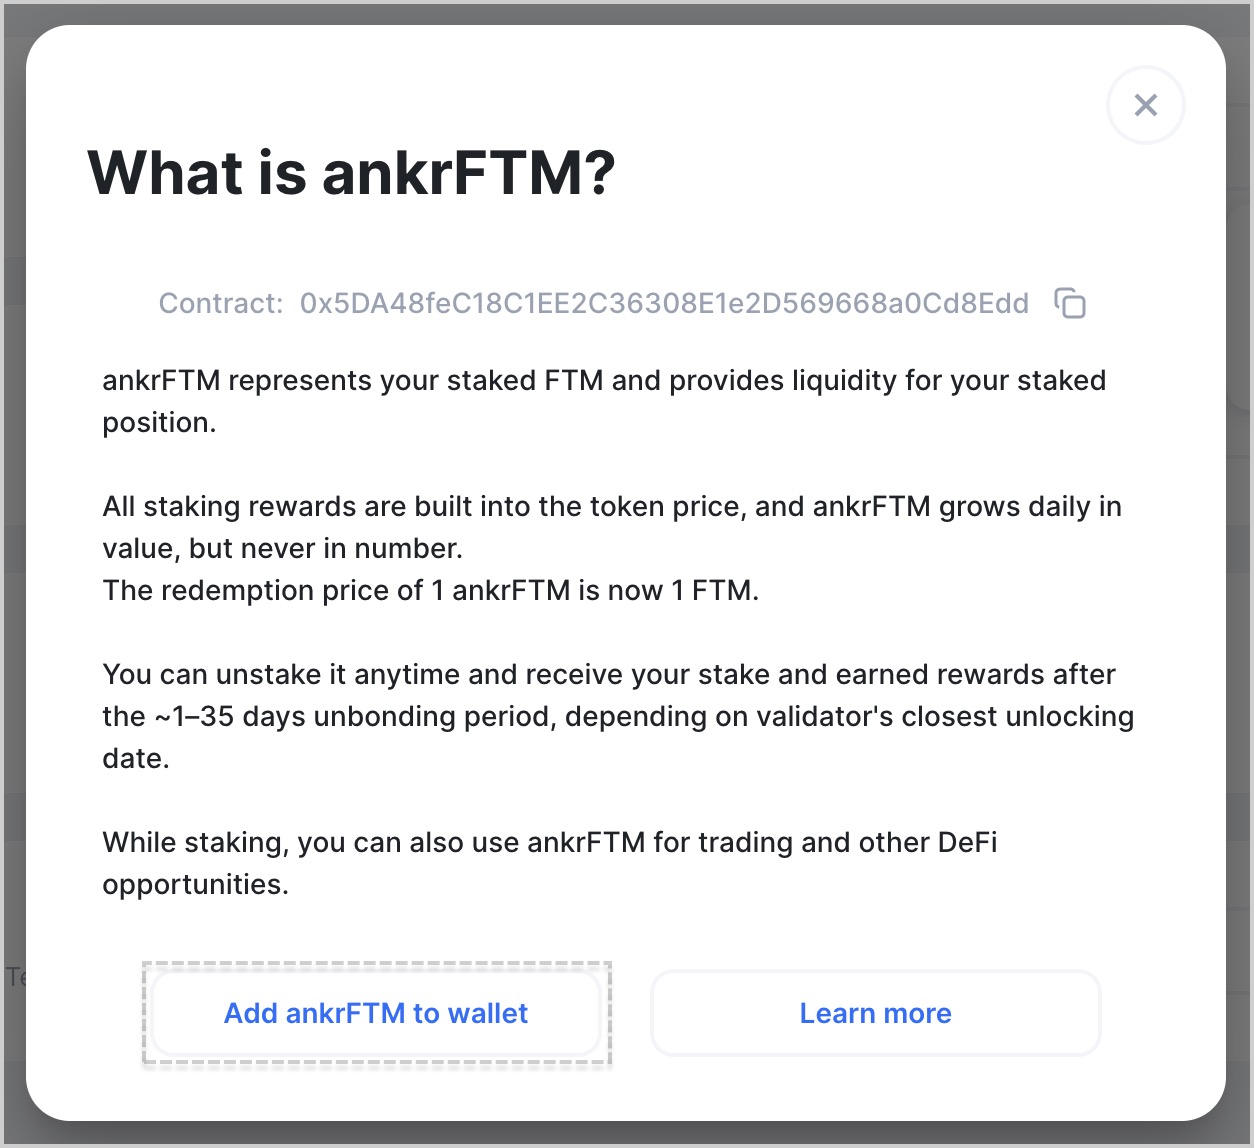 Click Add ankrFTM to wallet